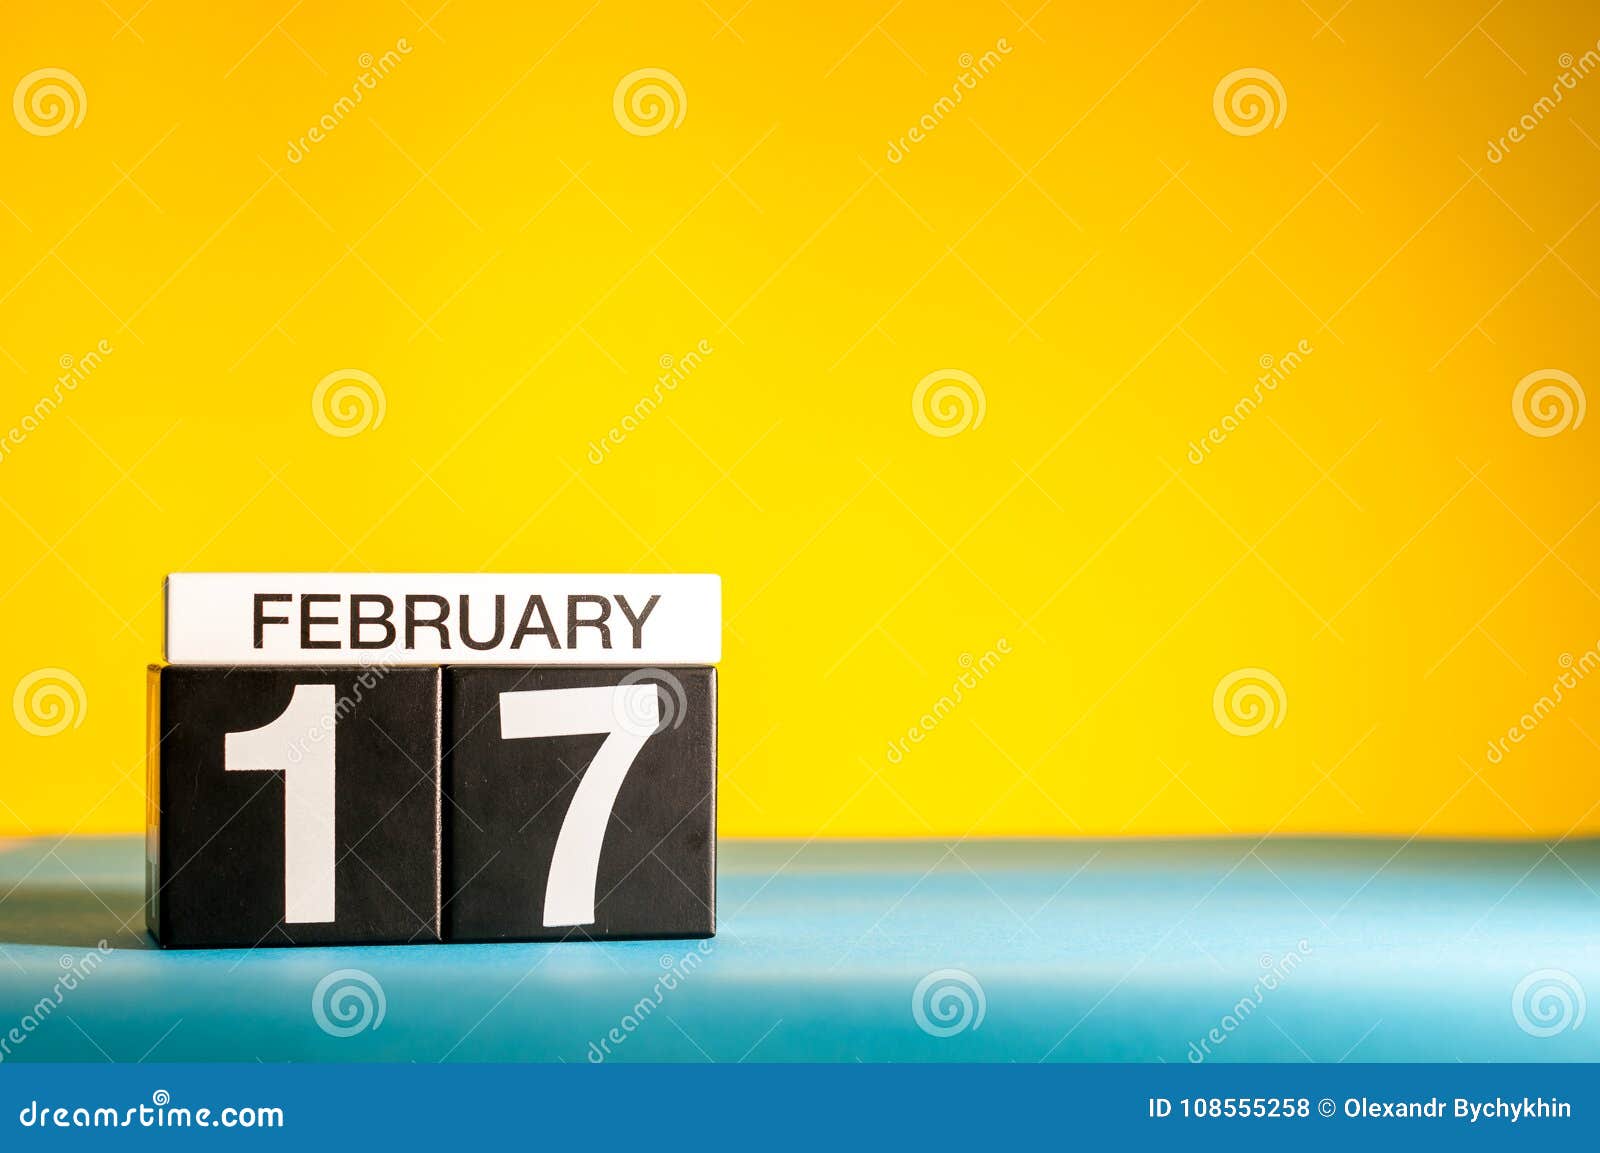 February 17th. Day 17 of February Month, Calendar on Yellow Background